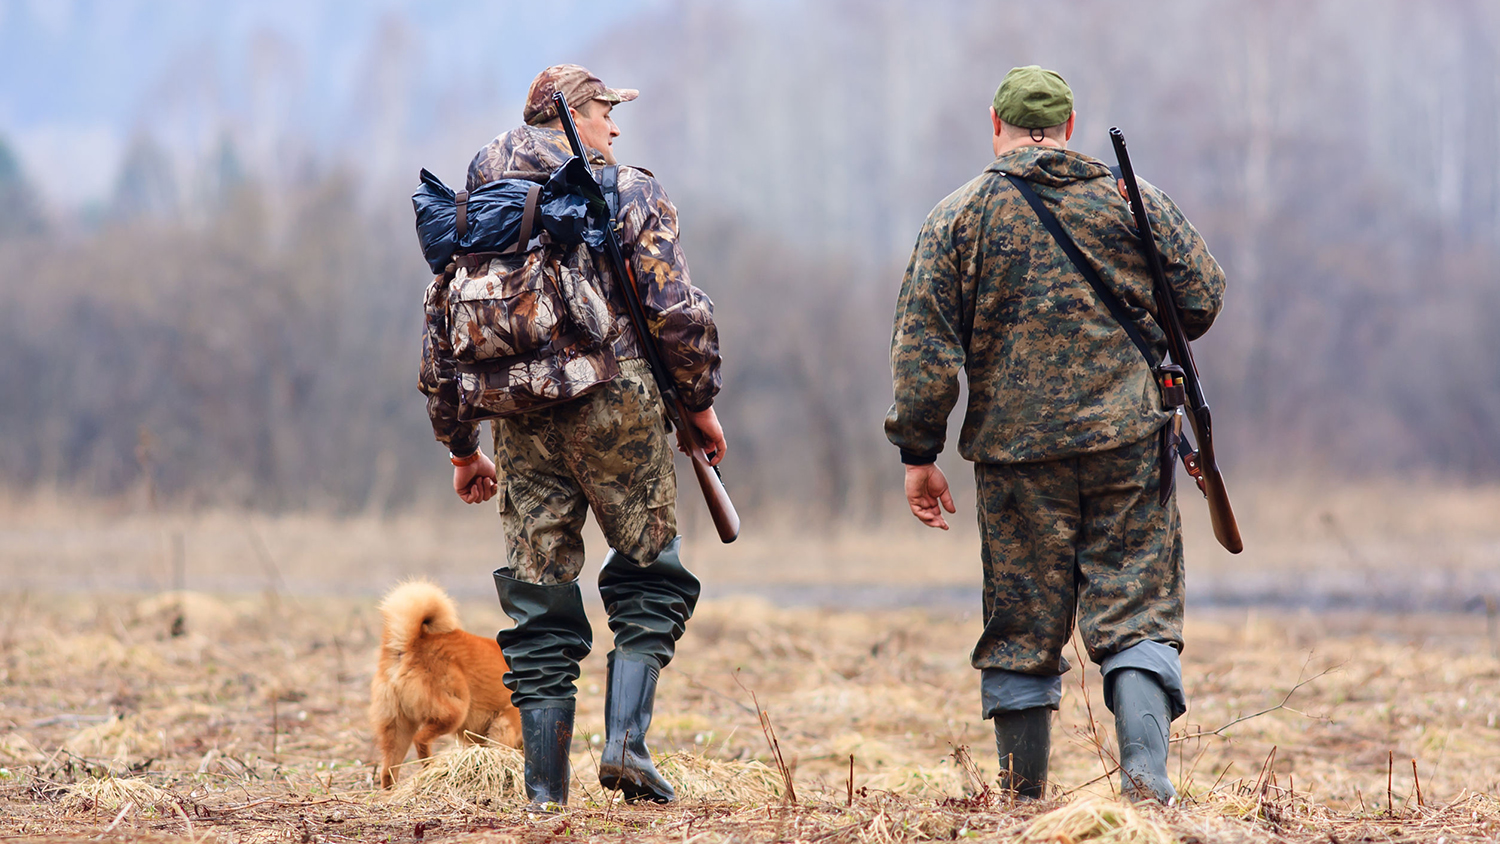 NRA Celebrates National Hunting and Fishing Day